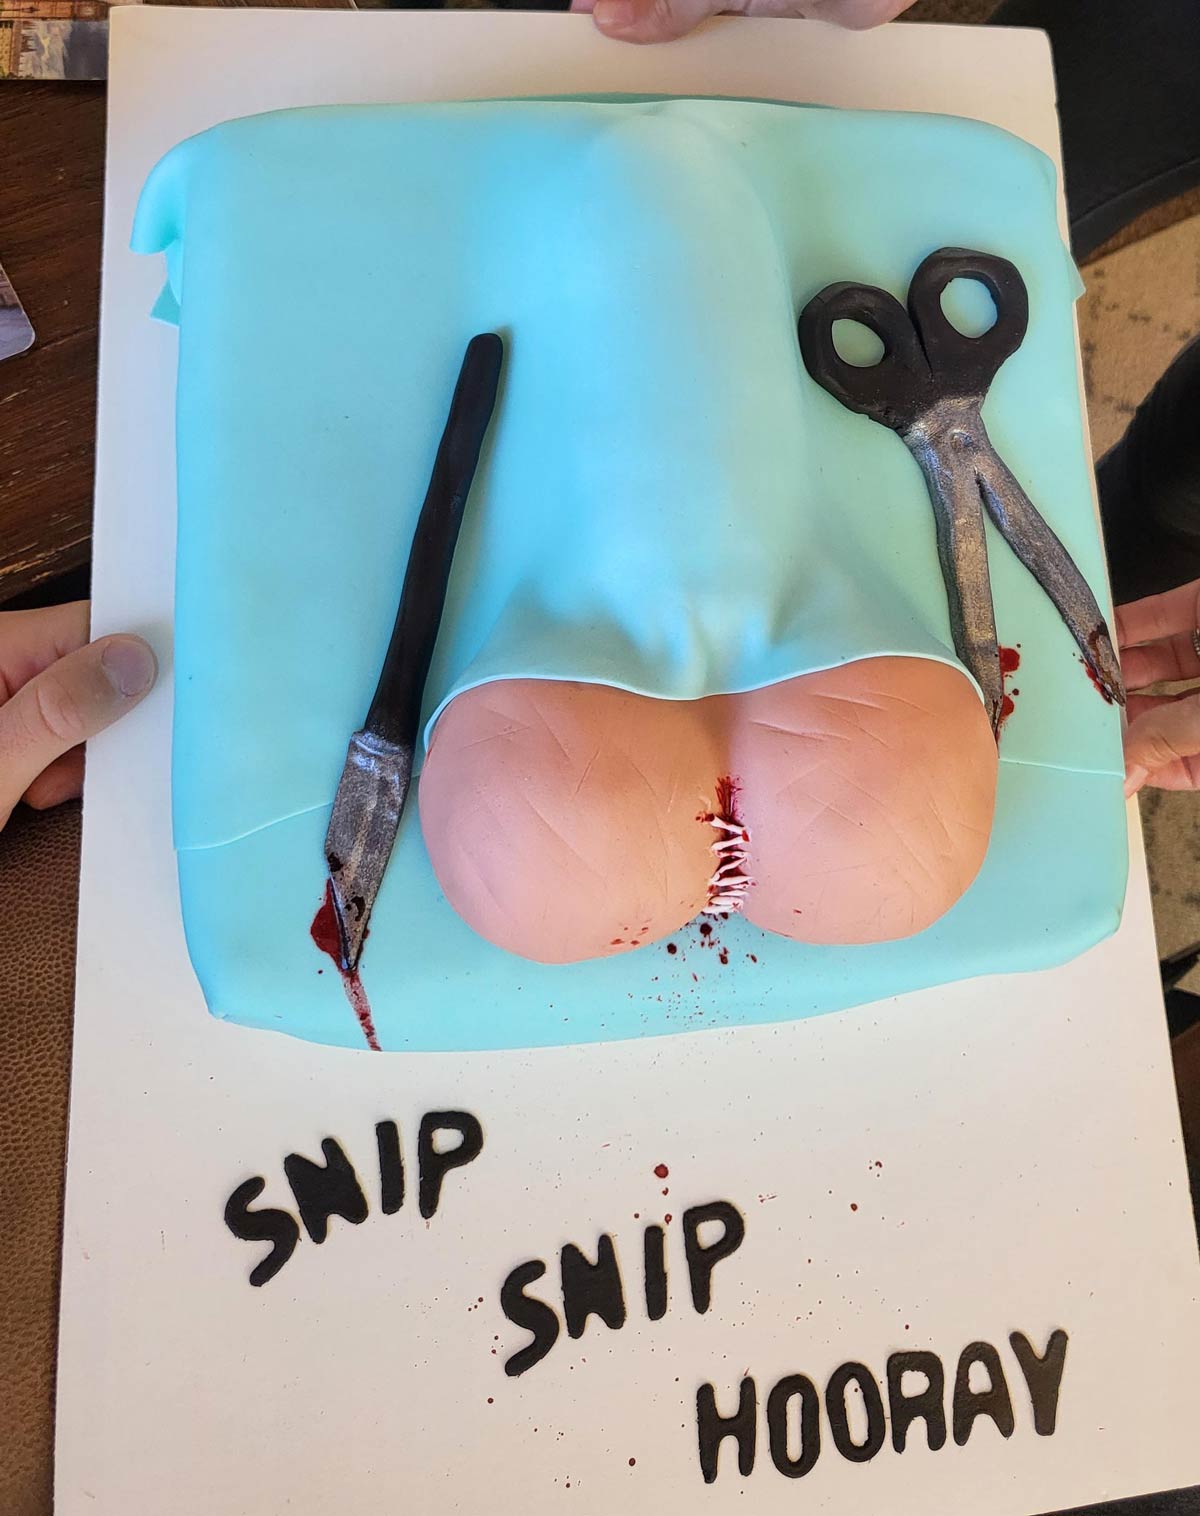 My wife thought it would be funny to throw me a vasectomy party. Here's the cake